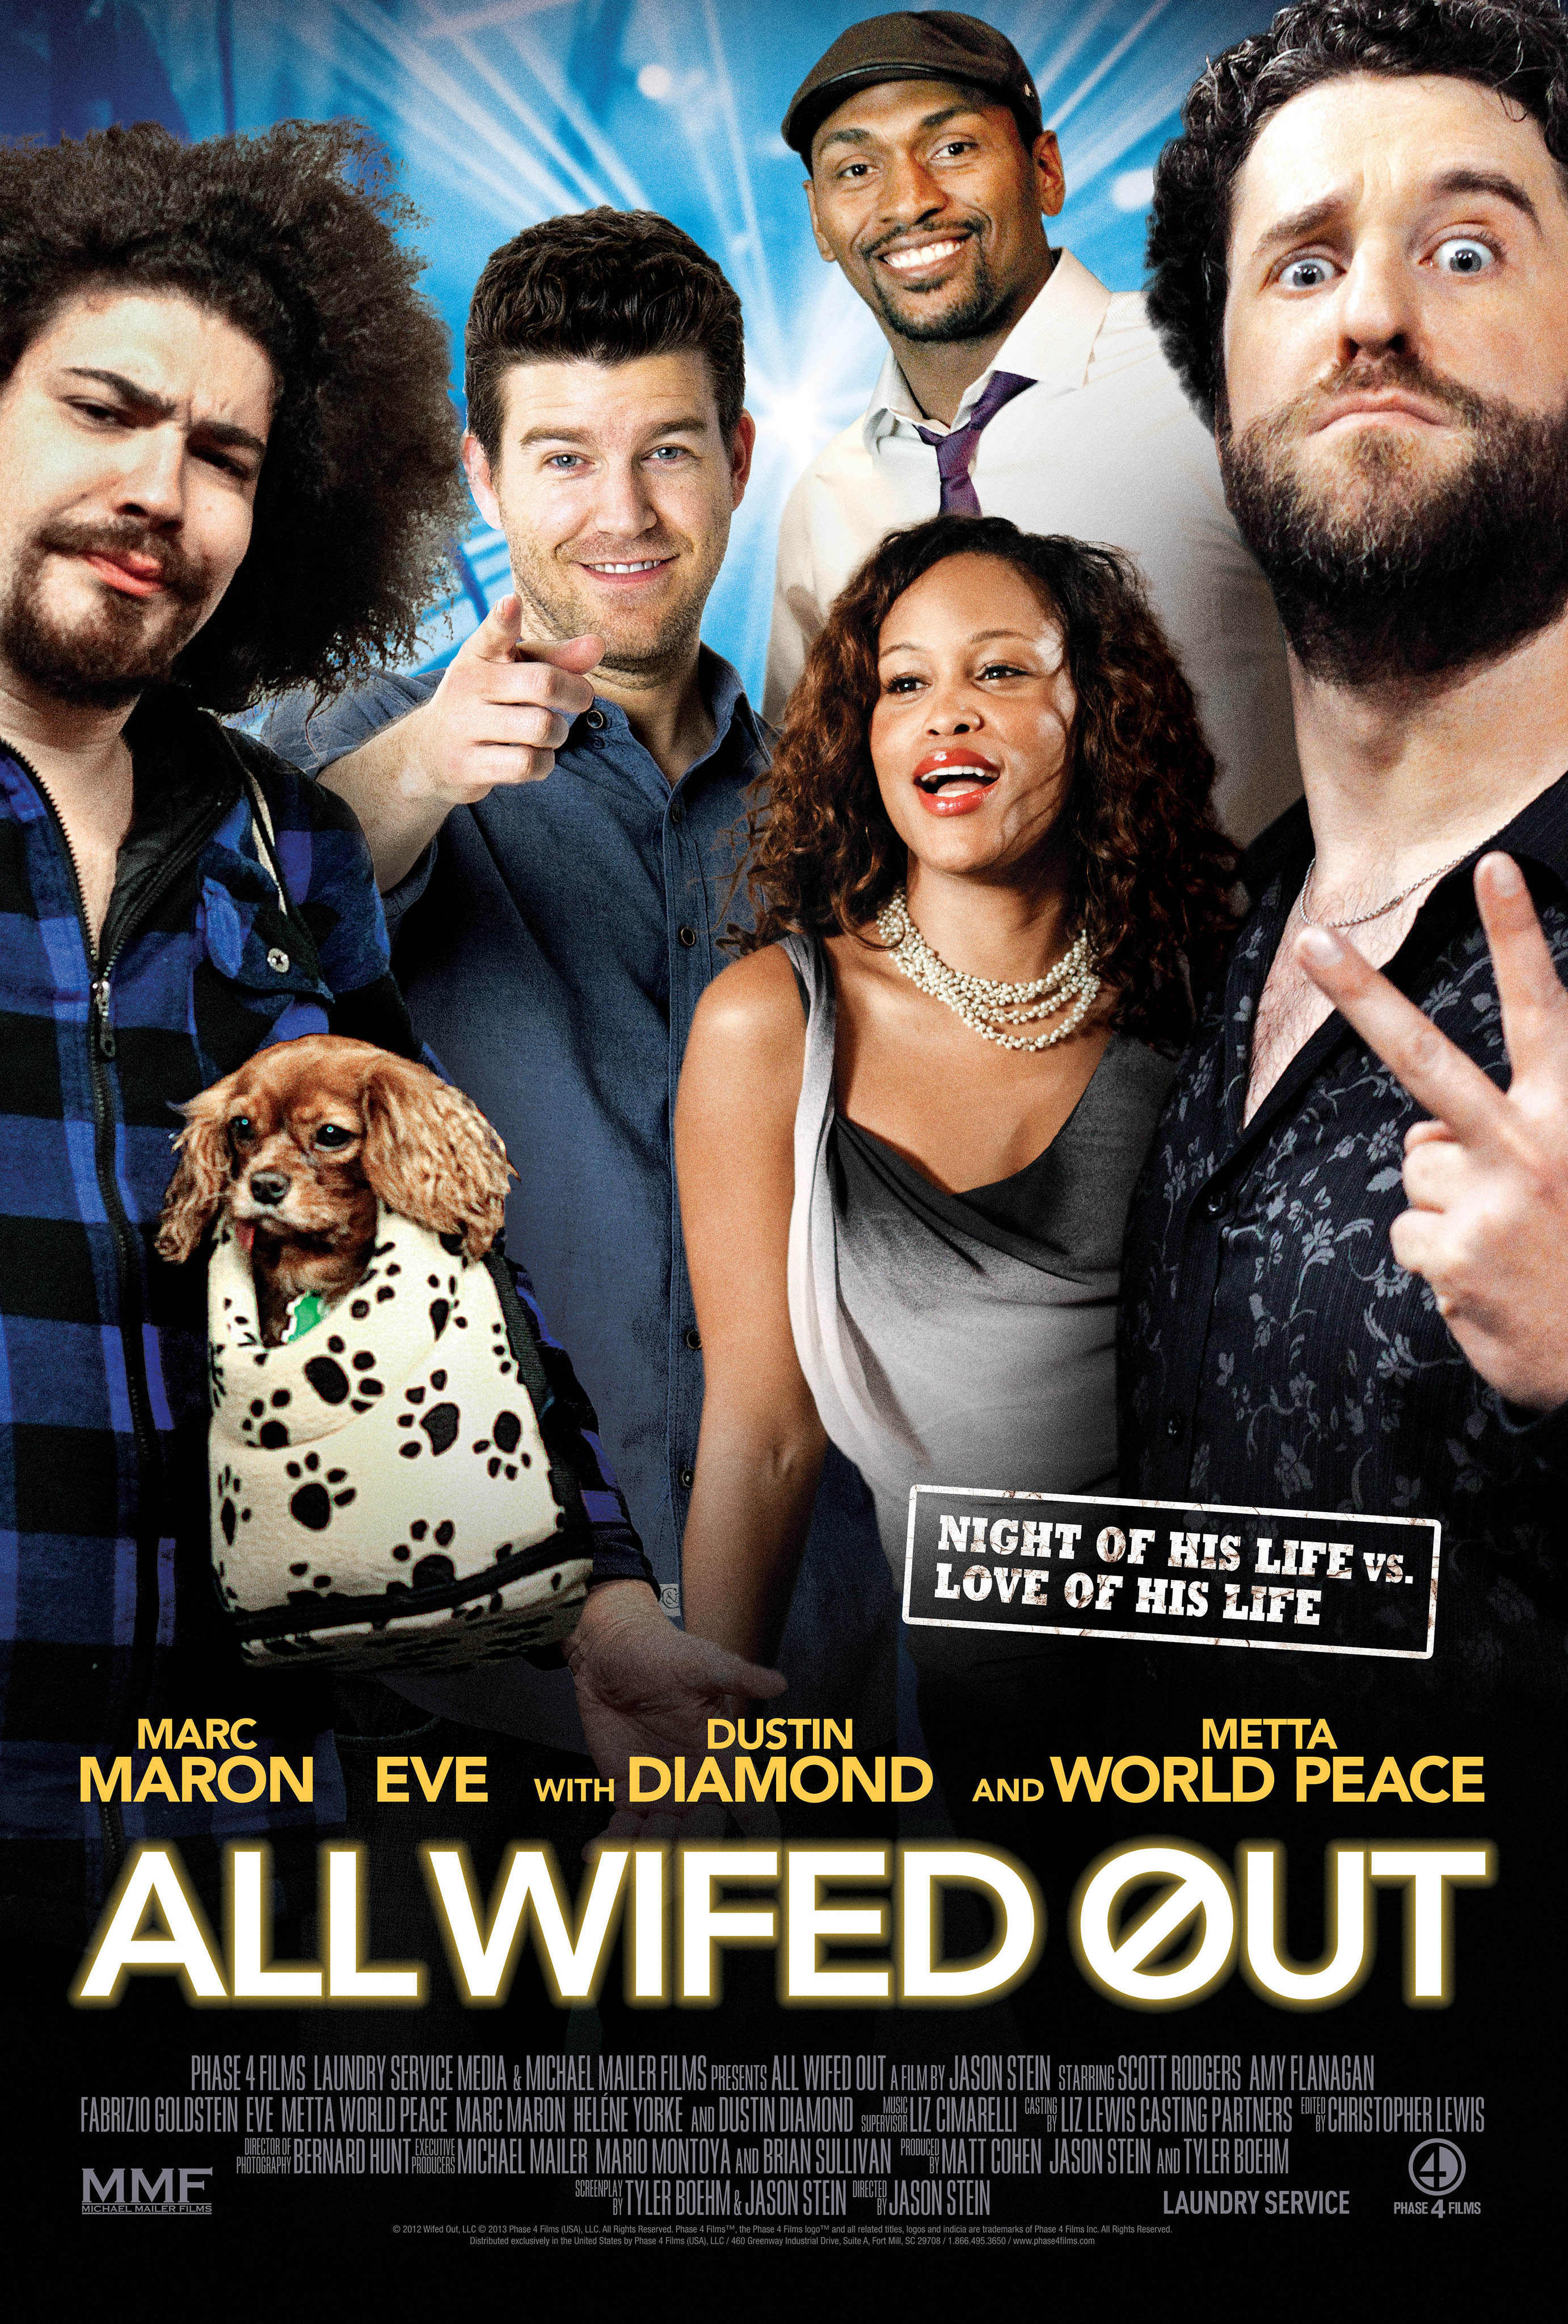 All Wifed Out (2012) starring Marc Maron on DVD on DVD